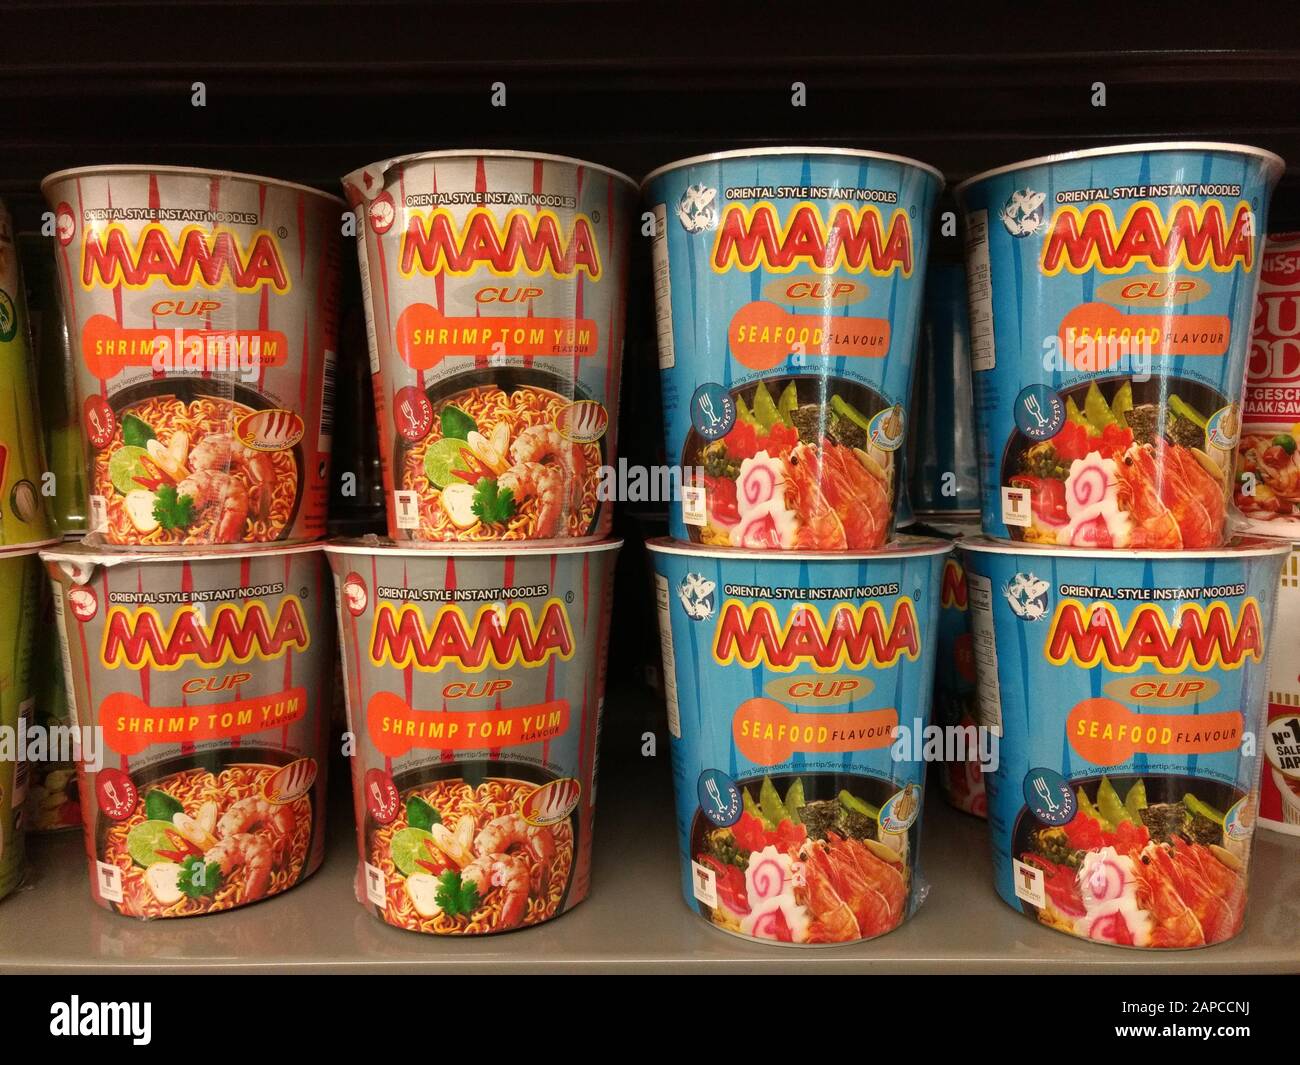 MAMA cup oriental style instant noodles with seafood flavour Stock